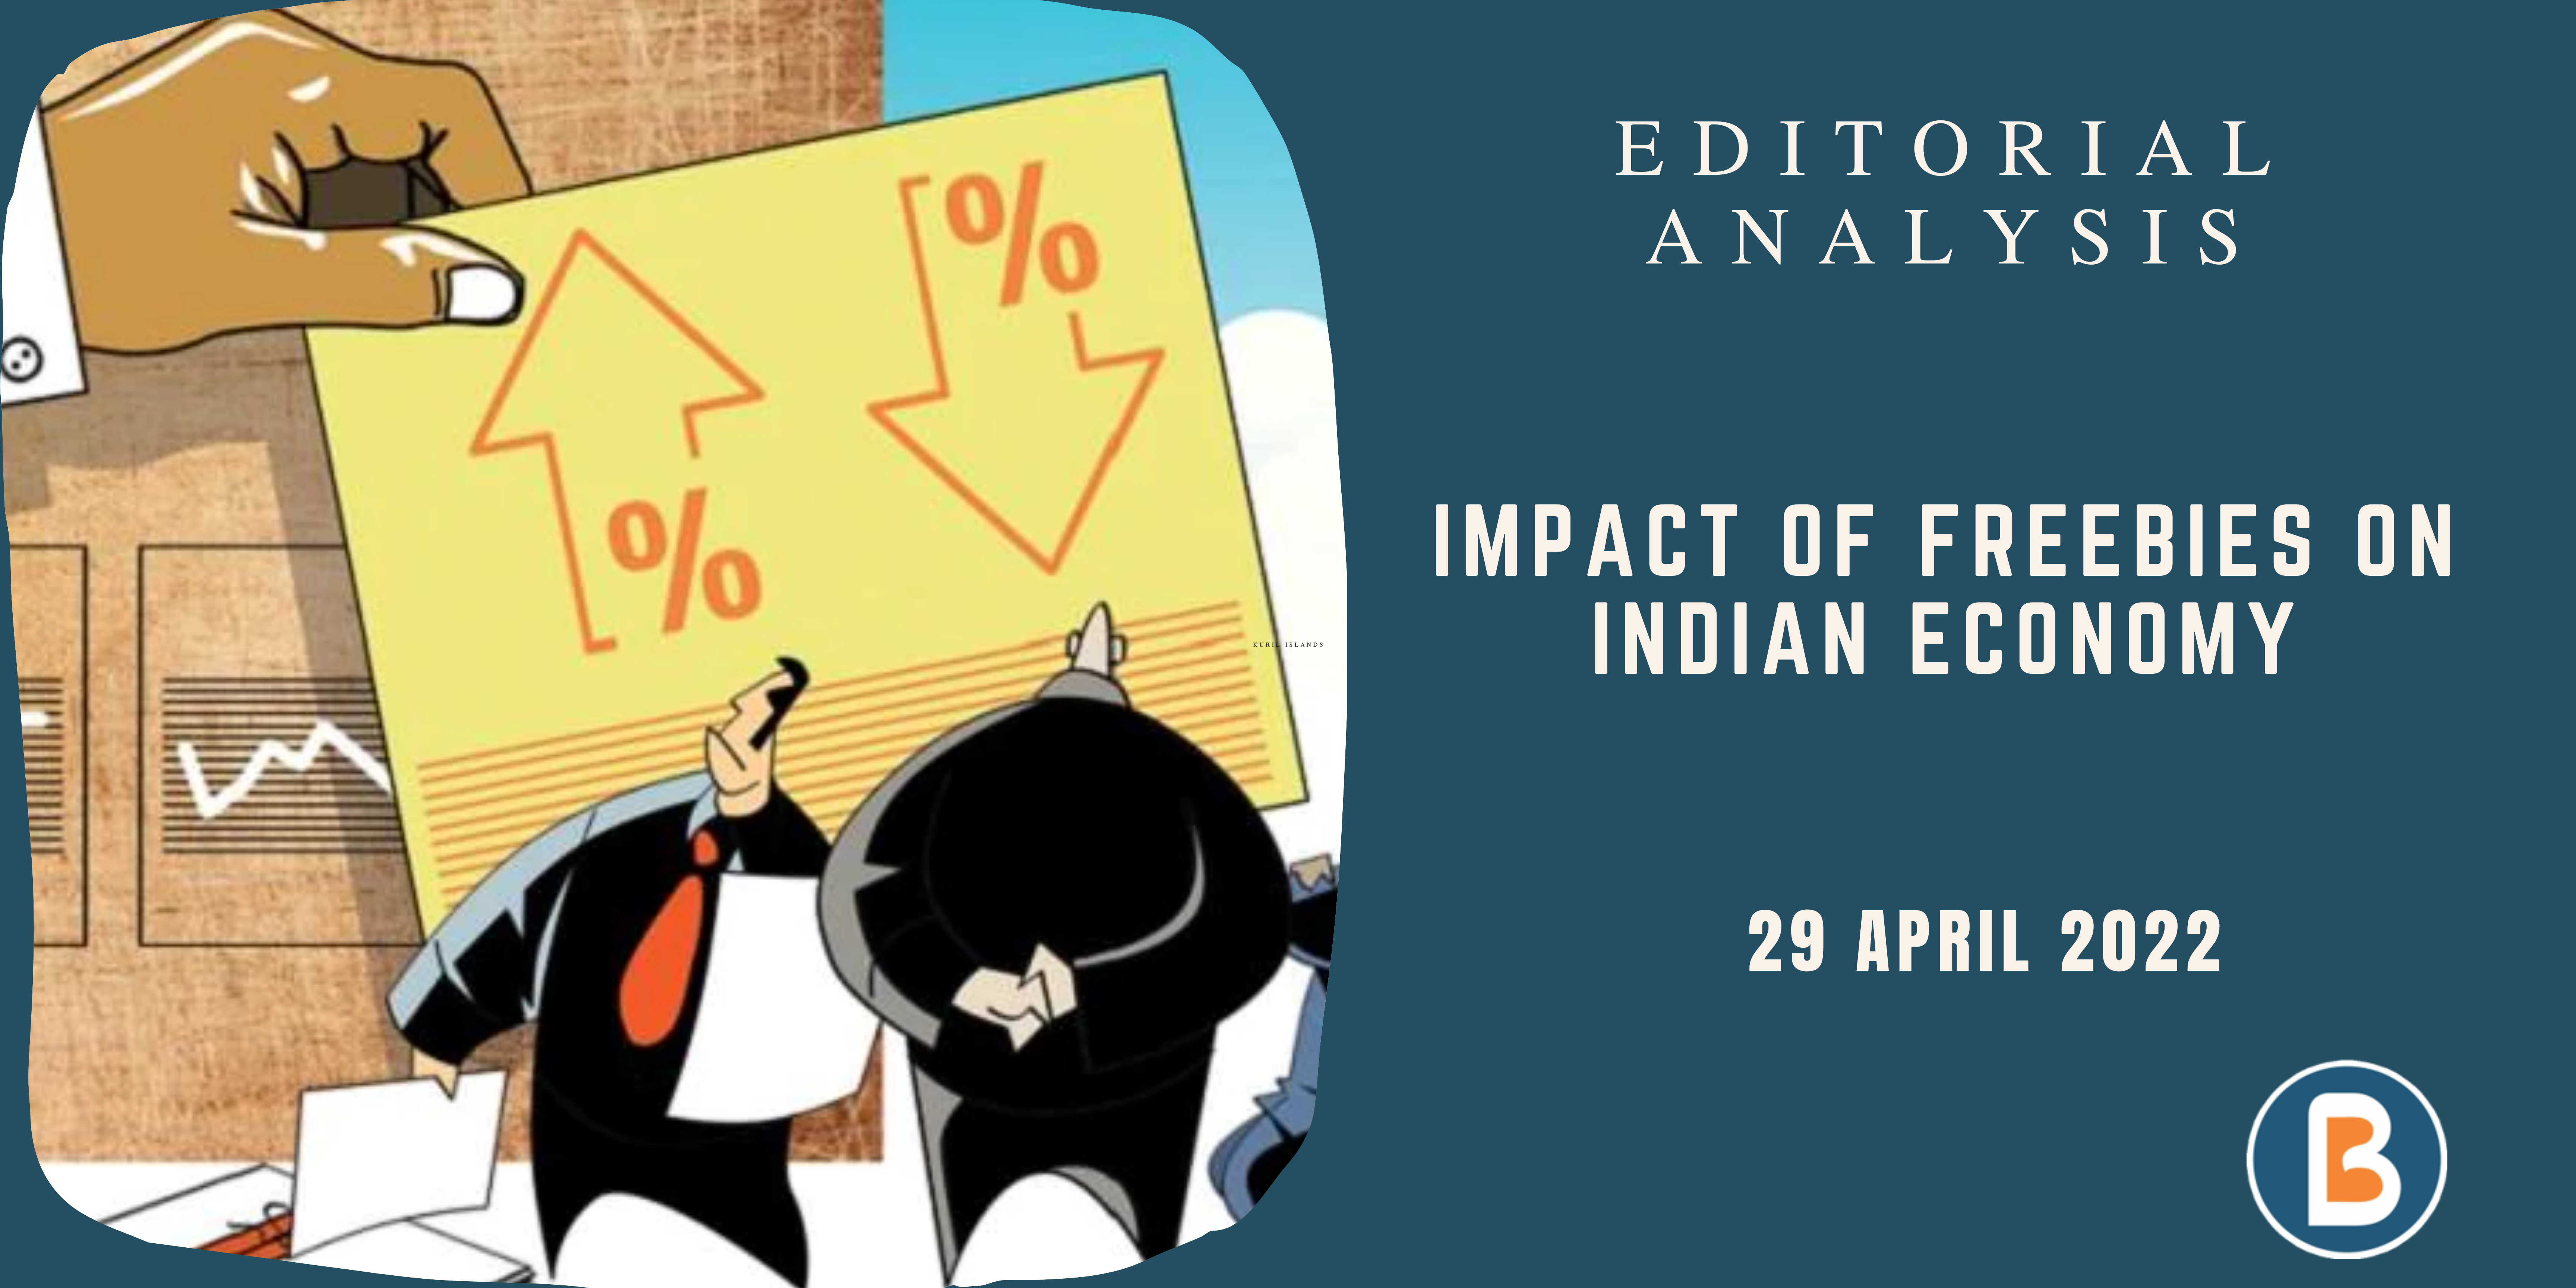 Editorial Analysis for UPSC - Impact of freebies on Indian Economy